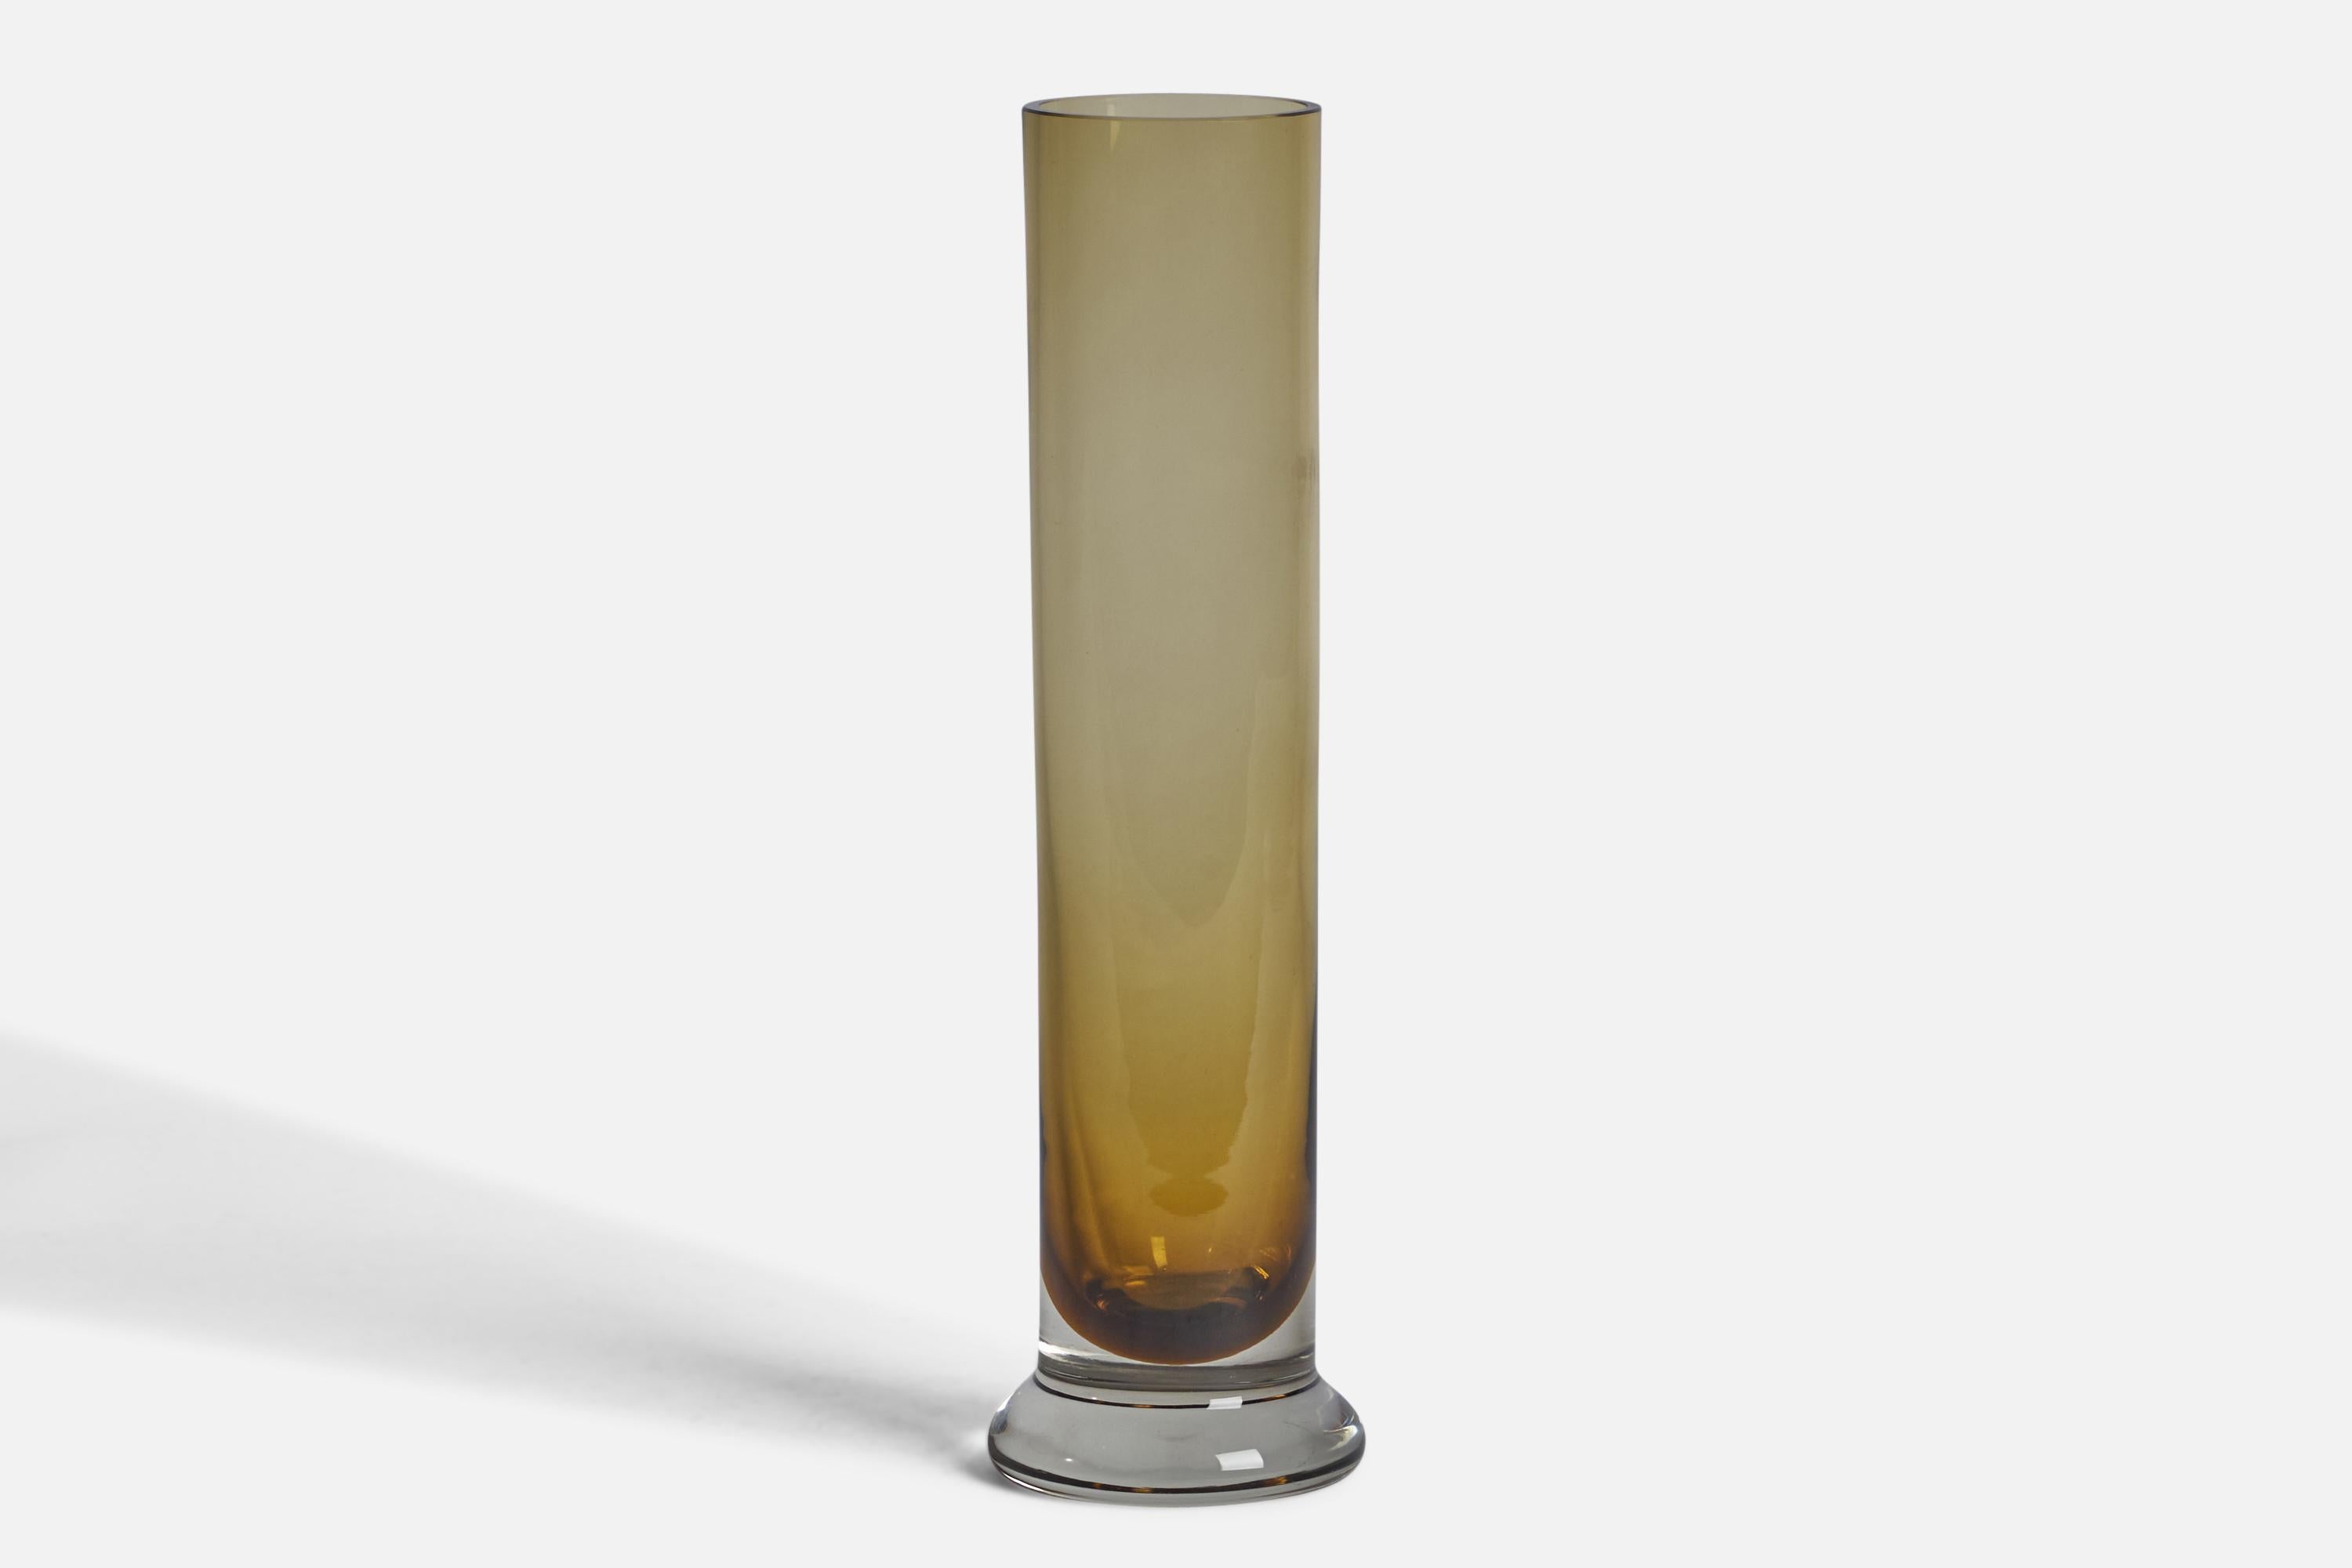 A yellow-coloured blown glass vase designed by Unto Suominen in 1964 and produced by Iittala, Finland, 1960s.